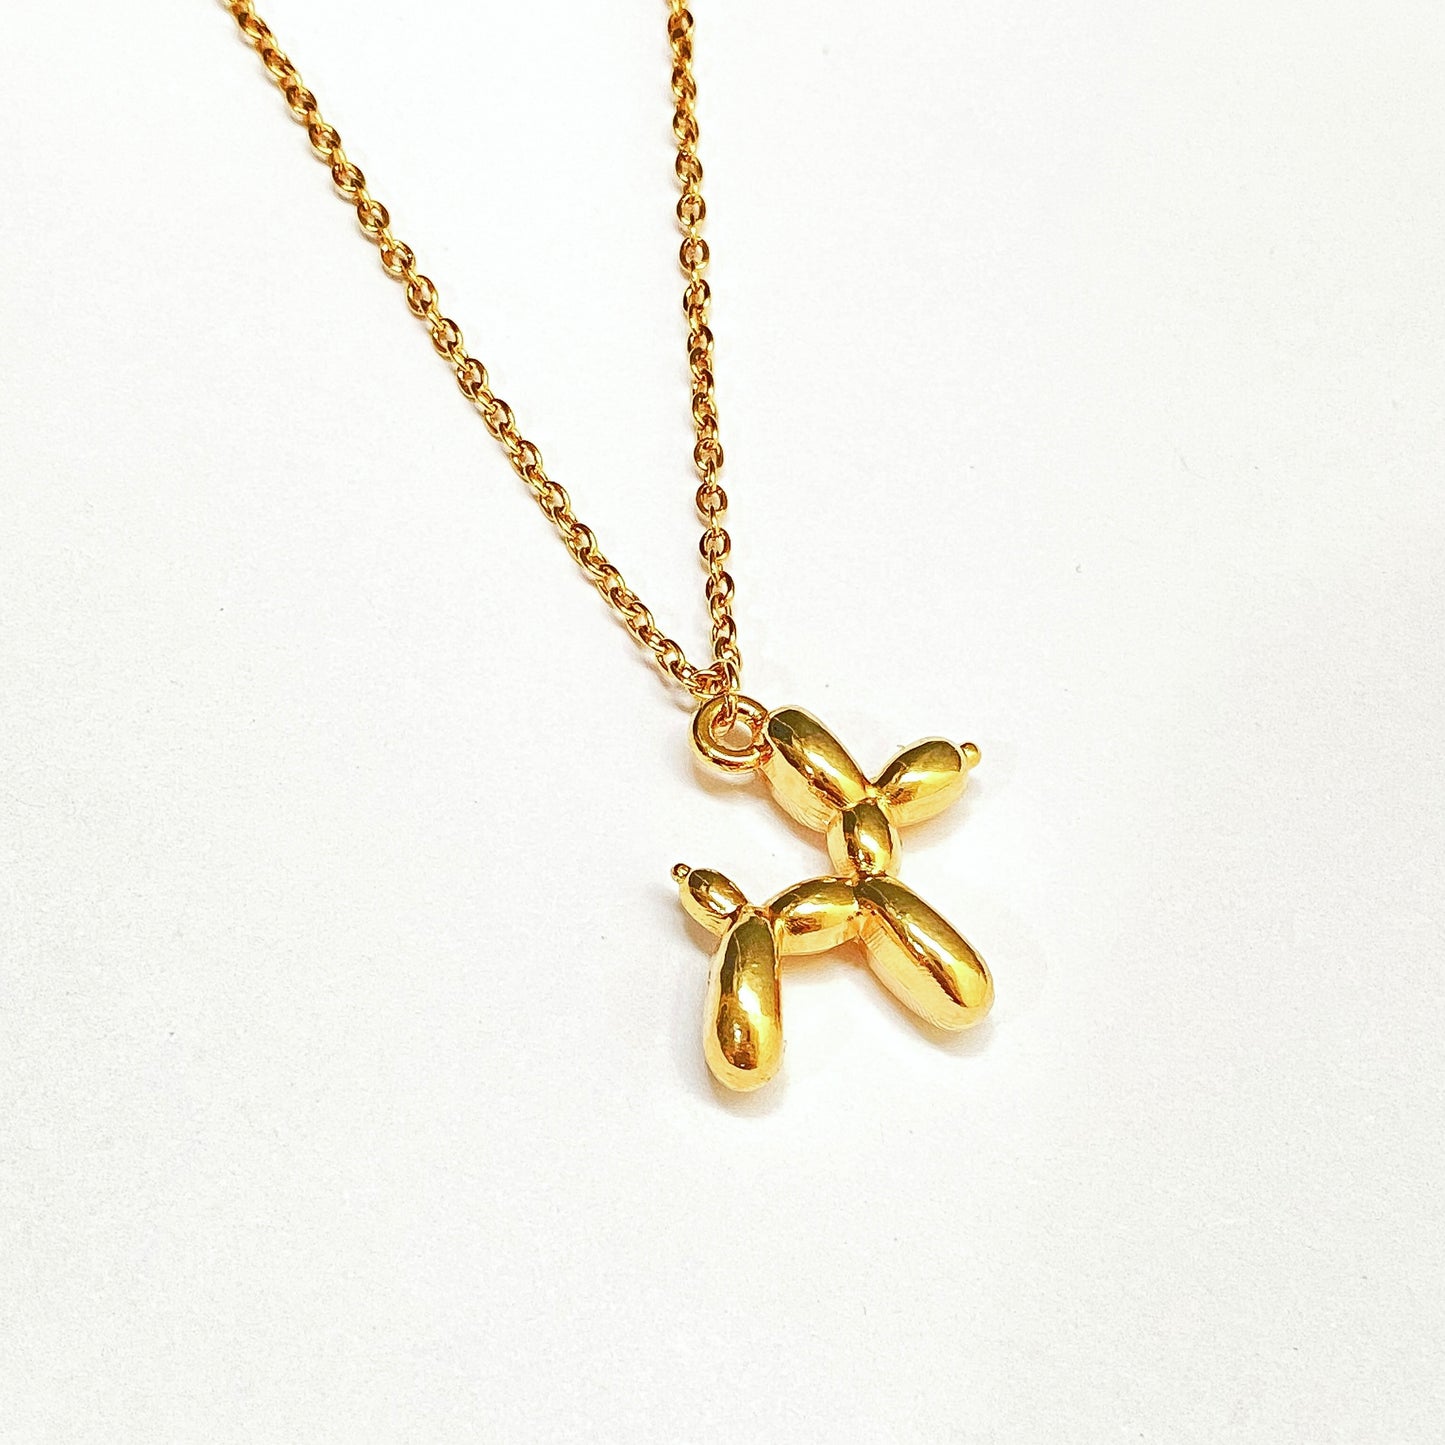 JIMENA - Gold Plated Balloon Dog Necklace